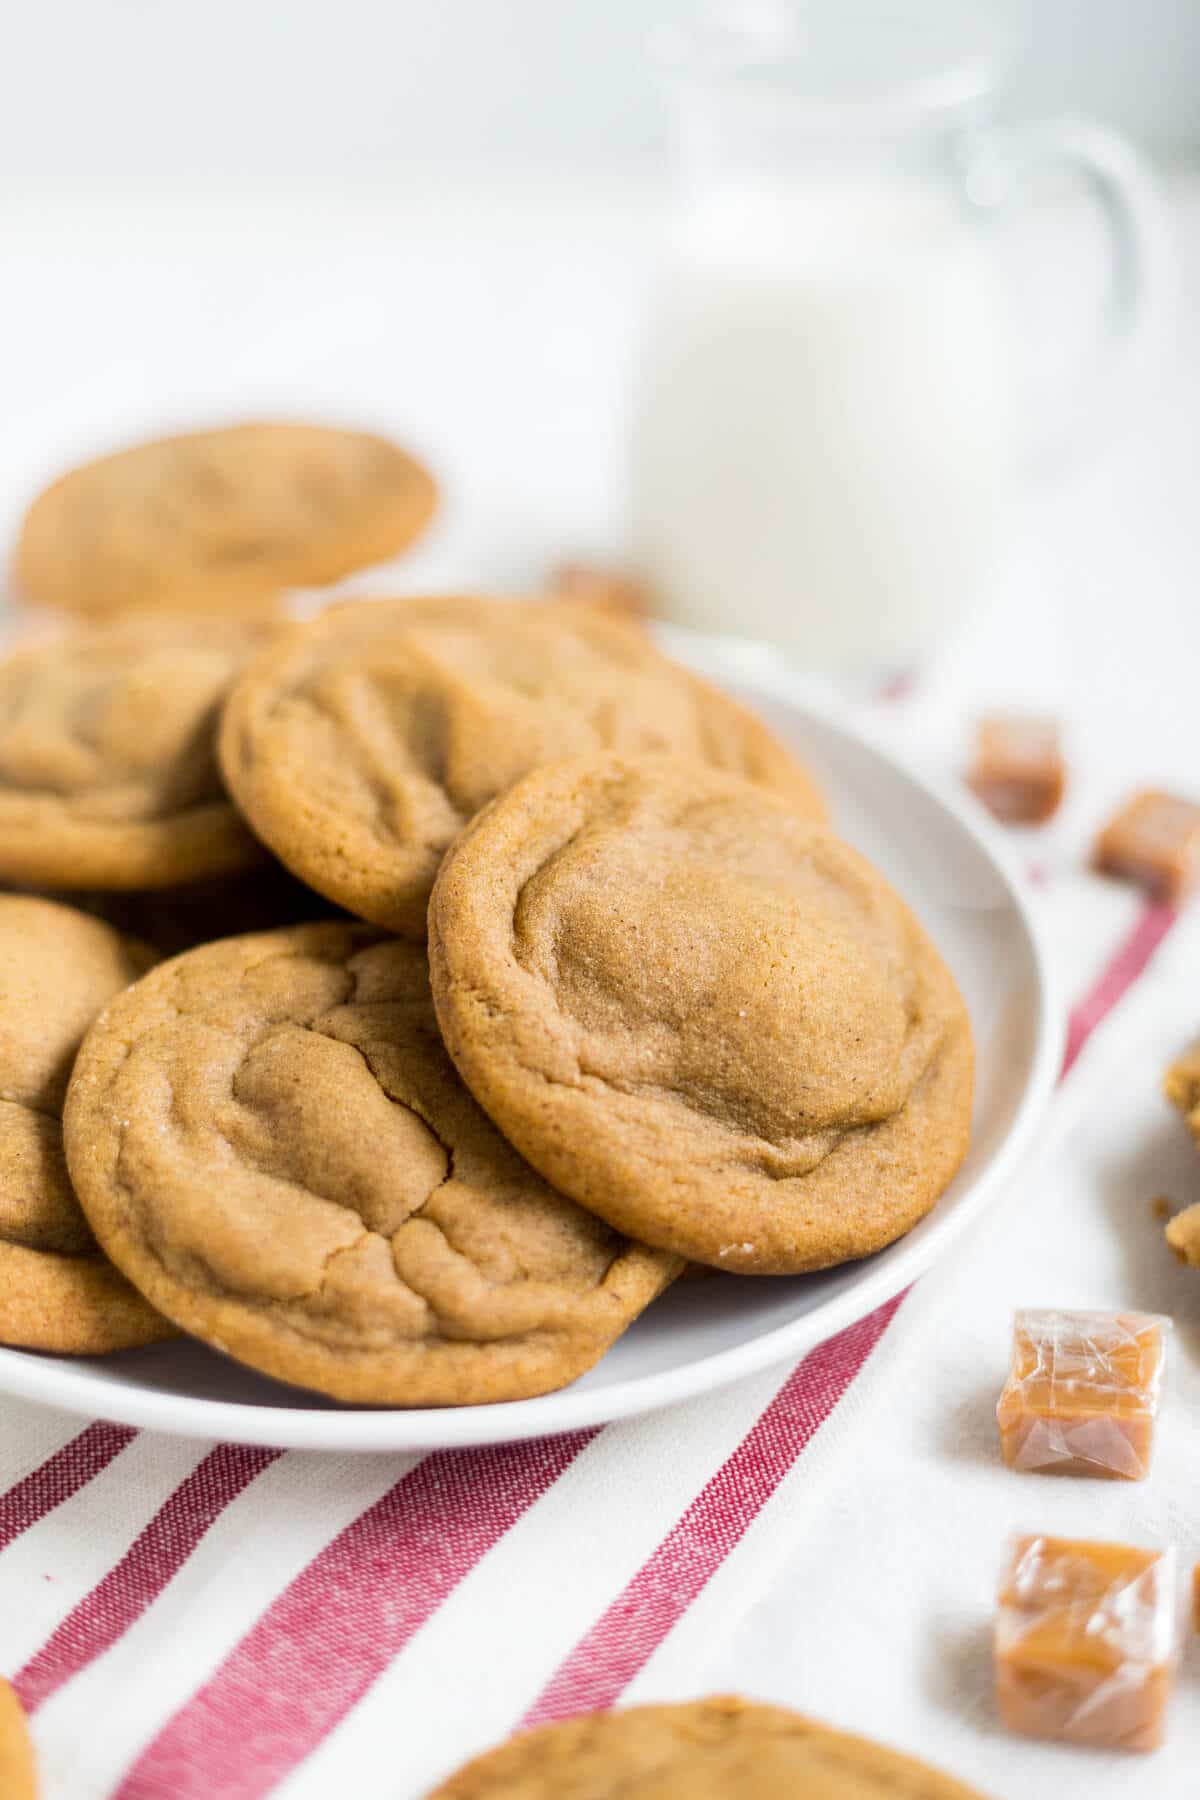 These soft and chewy ginger cookies are stuffed with a little salted caramel and baked to perfection. They're a great holiday recipe to add to your Christmas cookie collection.